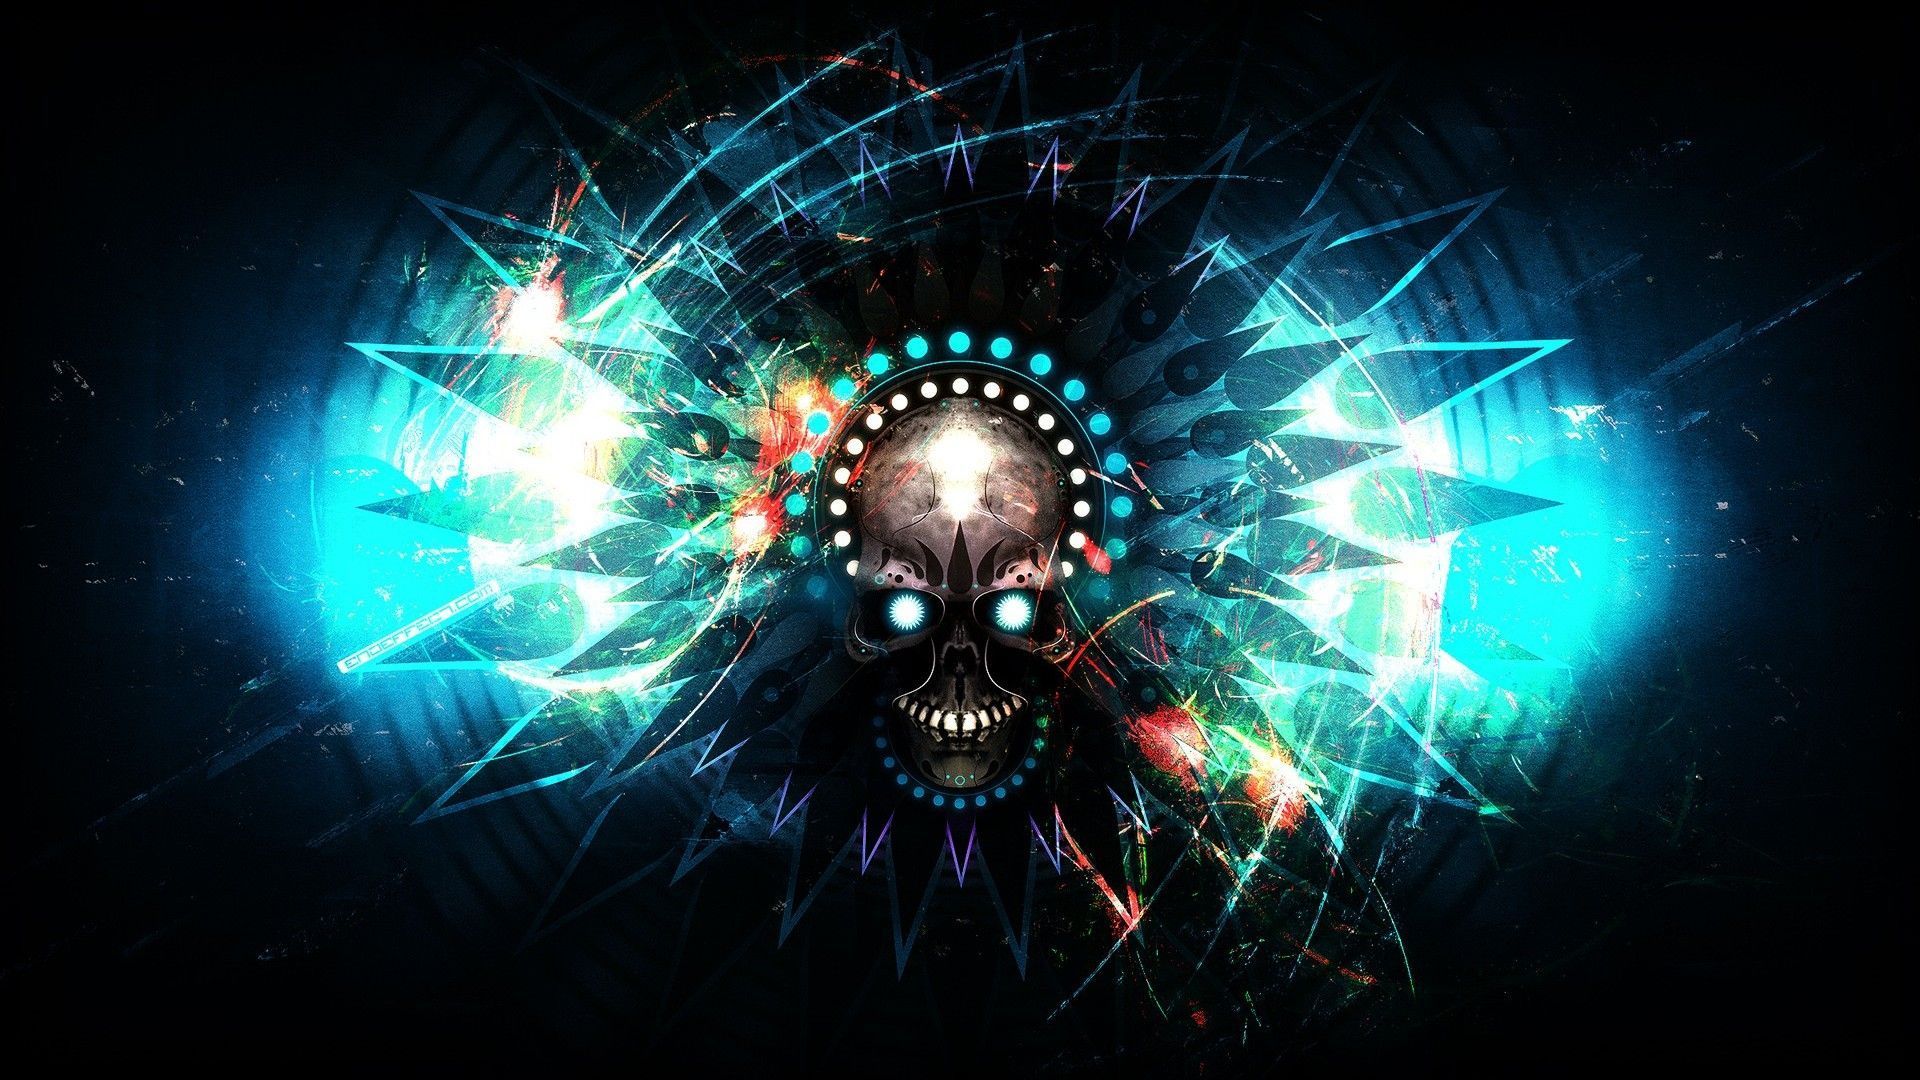 Download Dubstep Wallpaper Latest Awesome #qf2c0i52r5 - Download ...